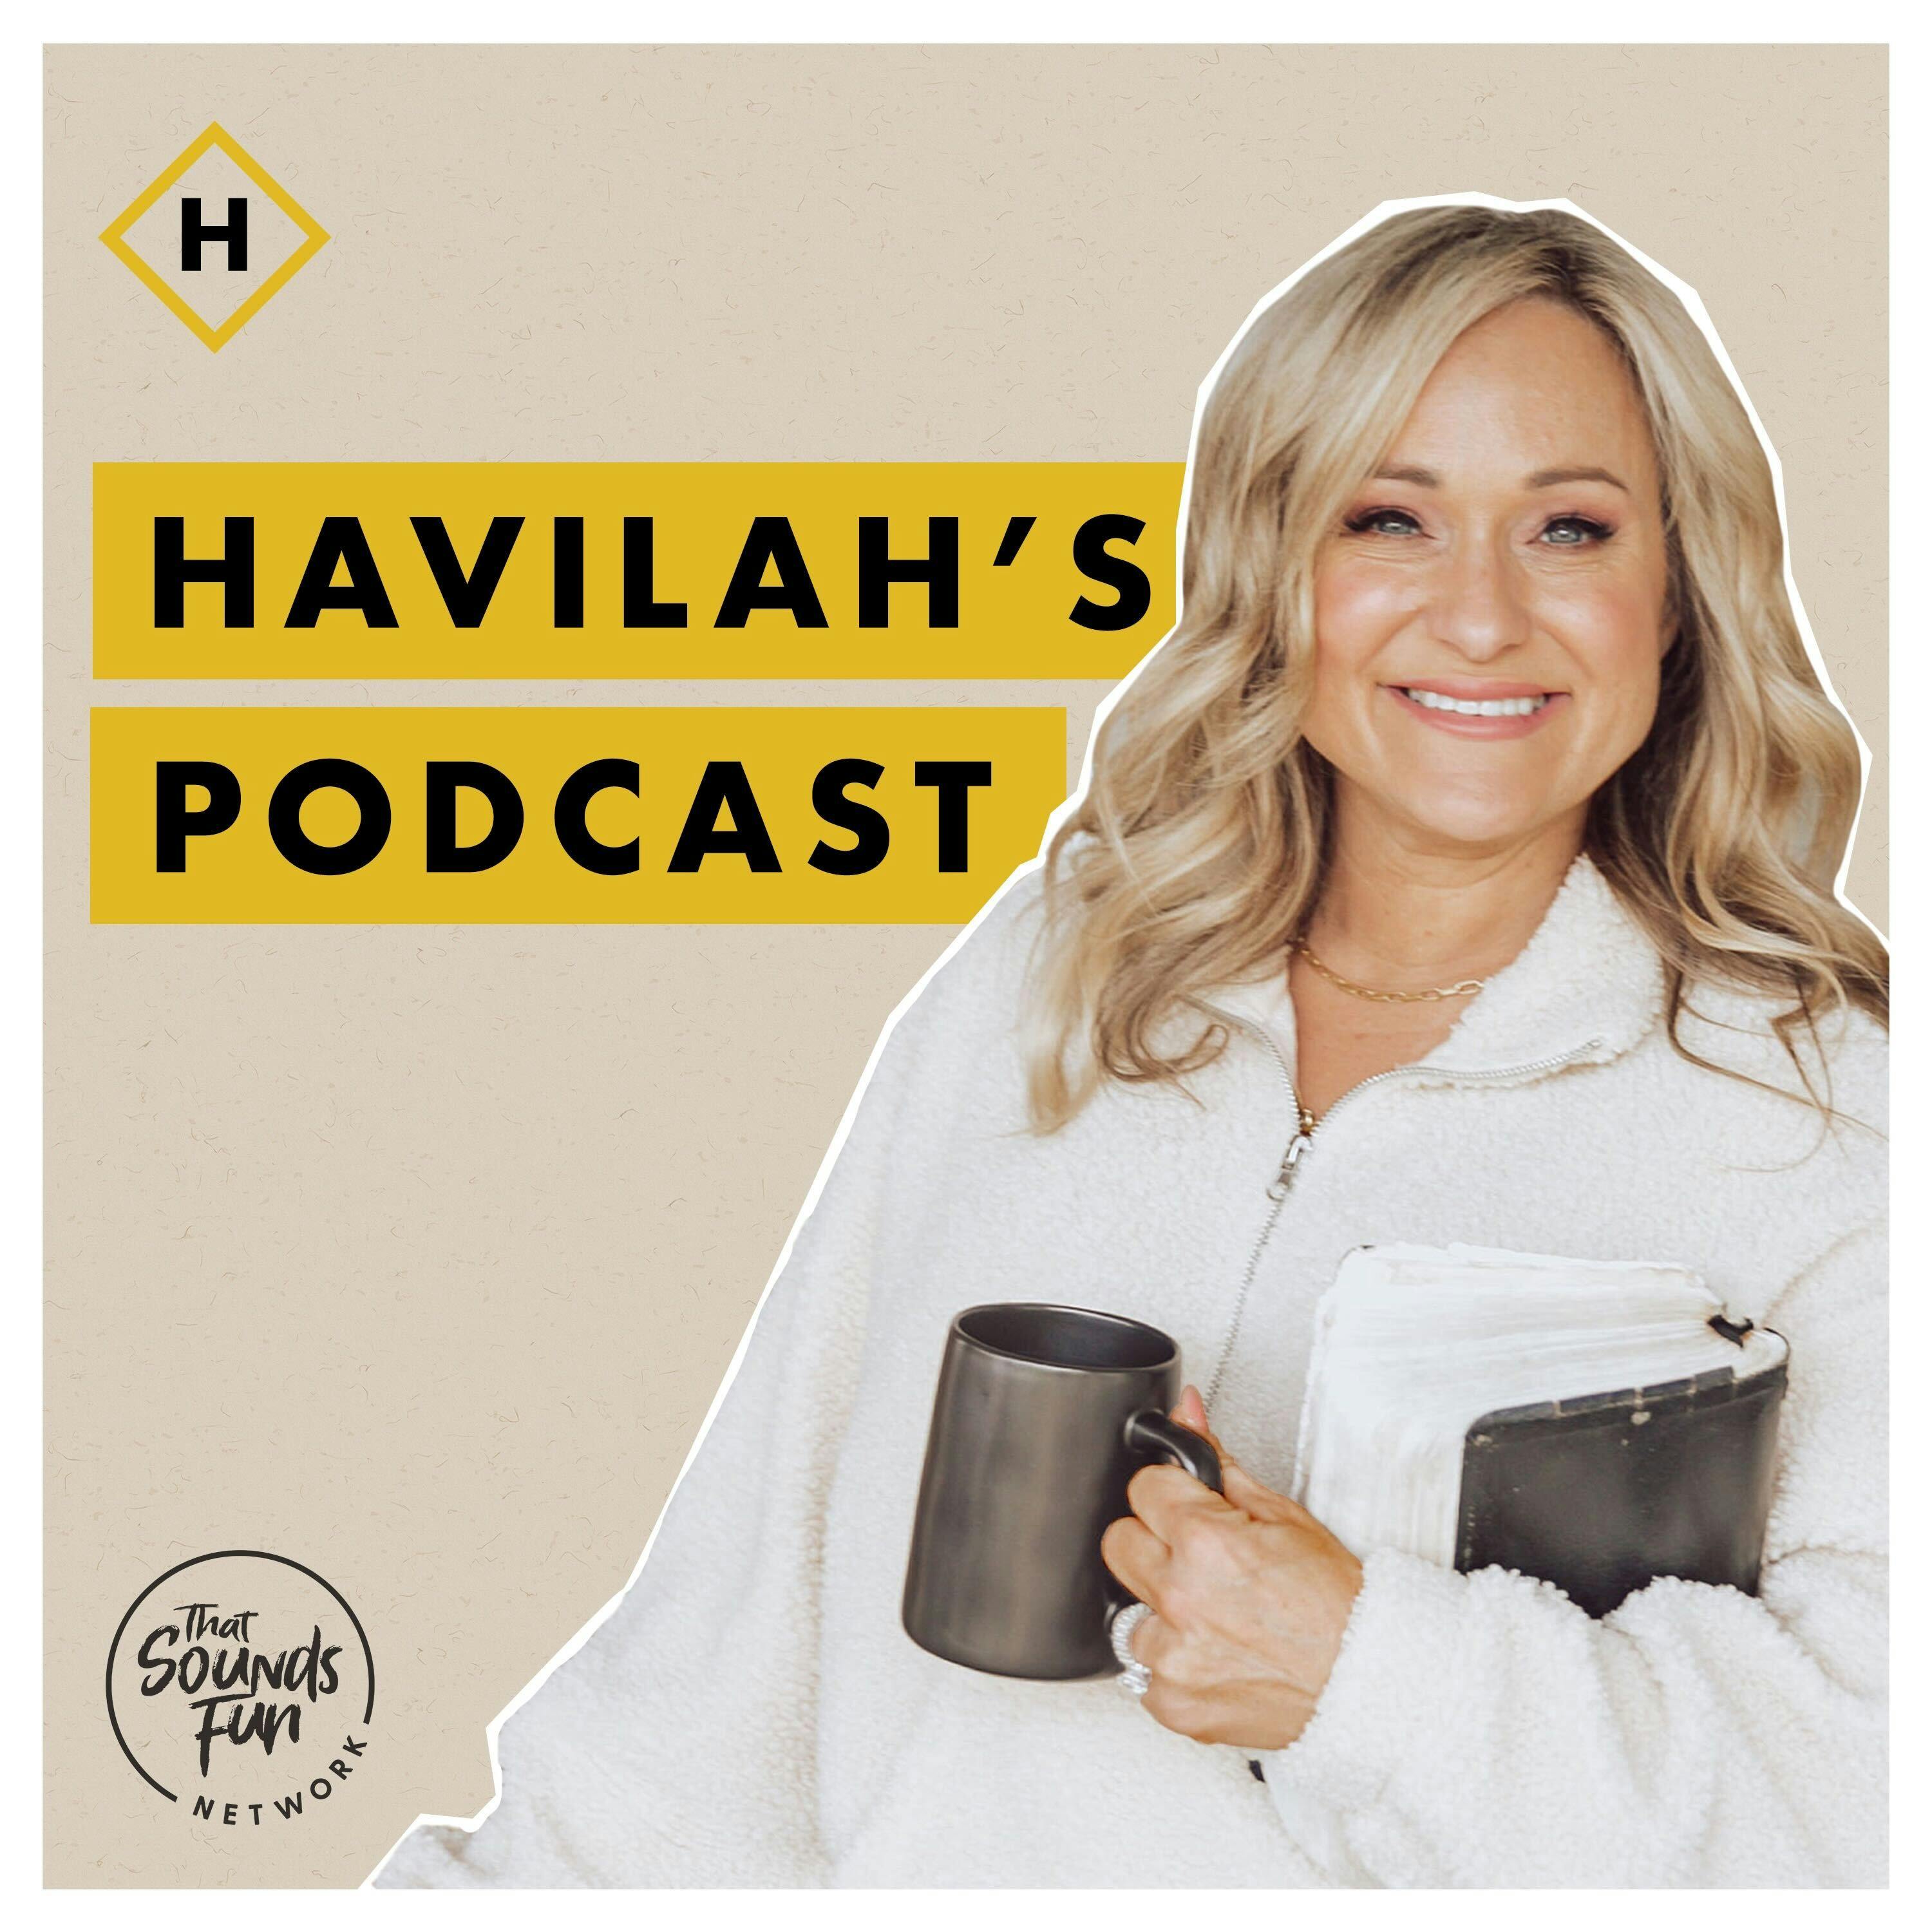 140: What Do You Do When You Face Hard Things?